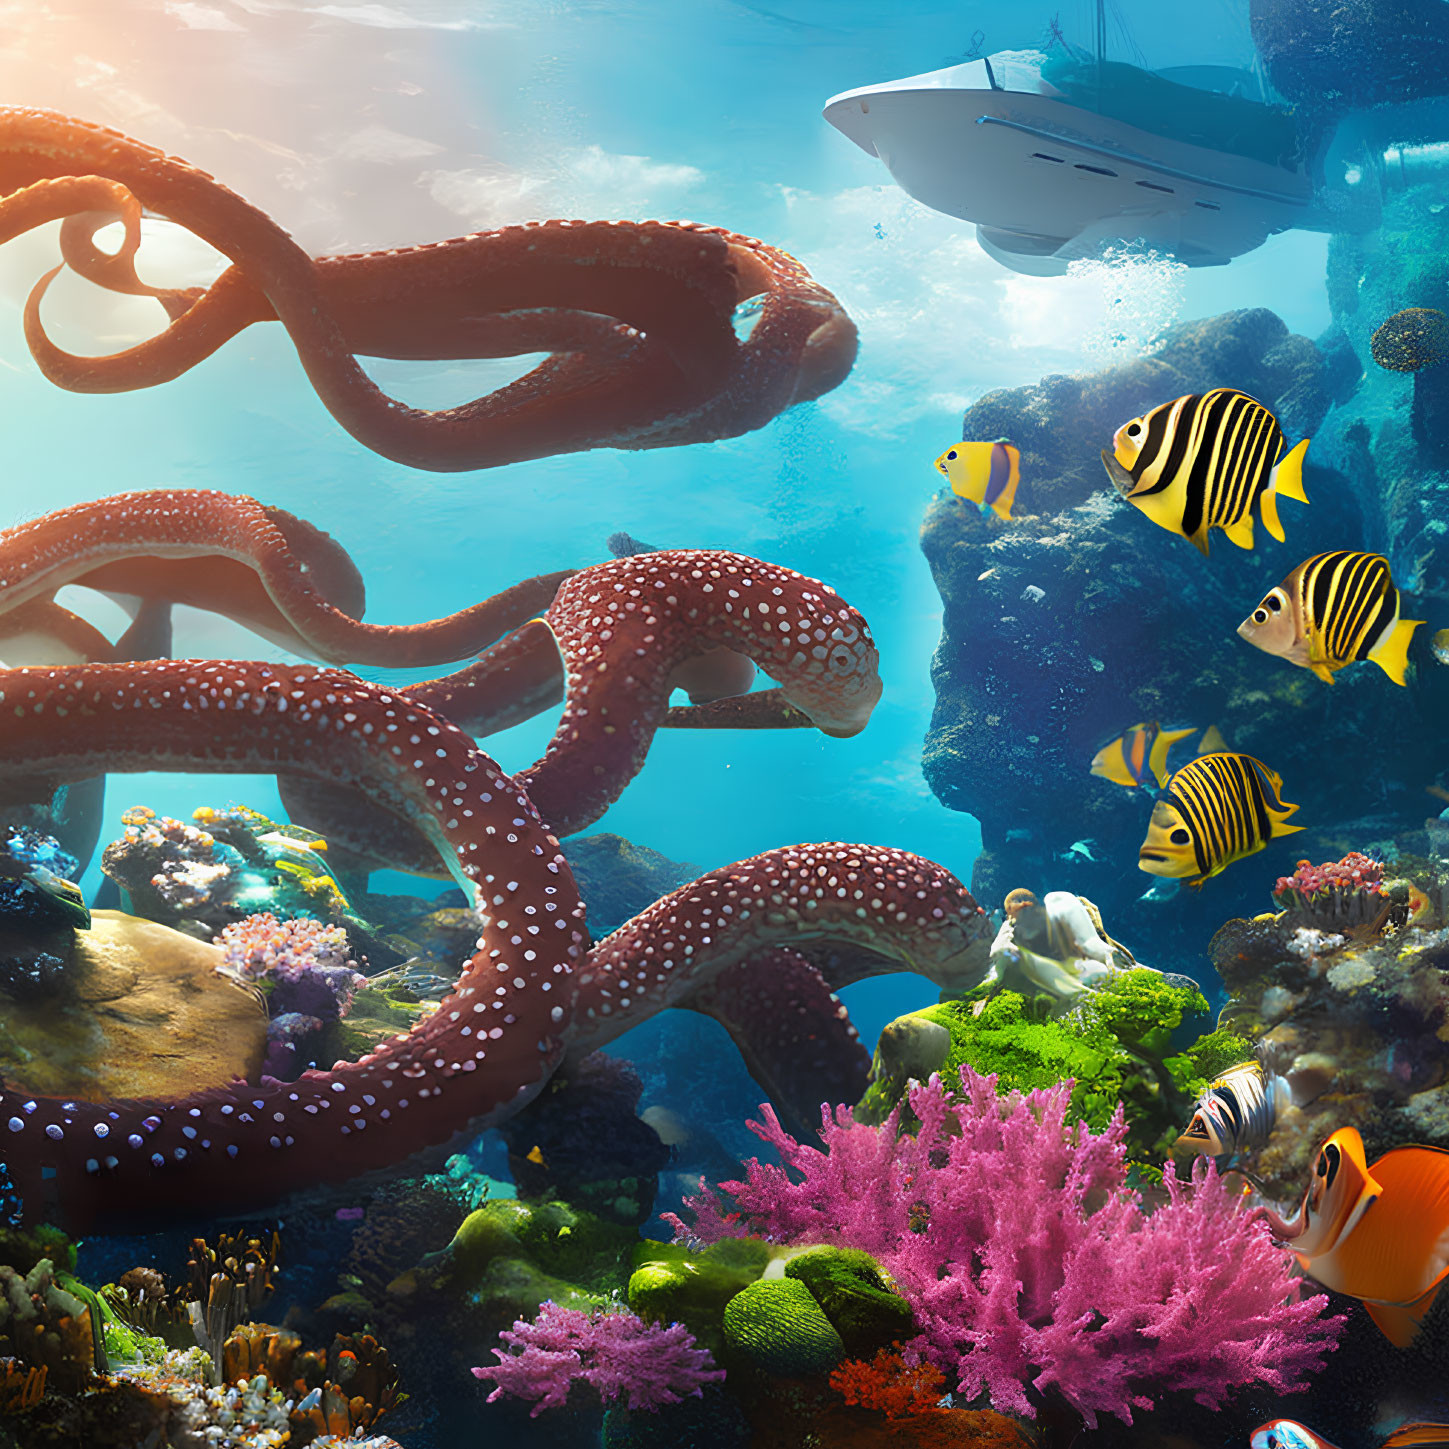 Colorful Underwater Scene with Giant Octopus, Clownfish, Submarine, and Coral Reefs